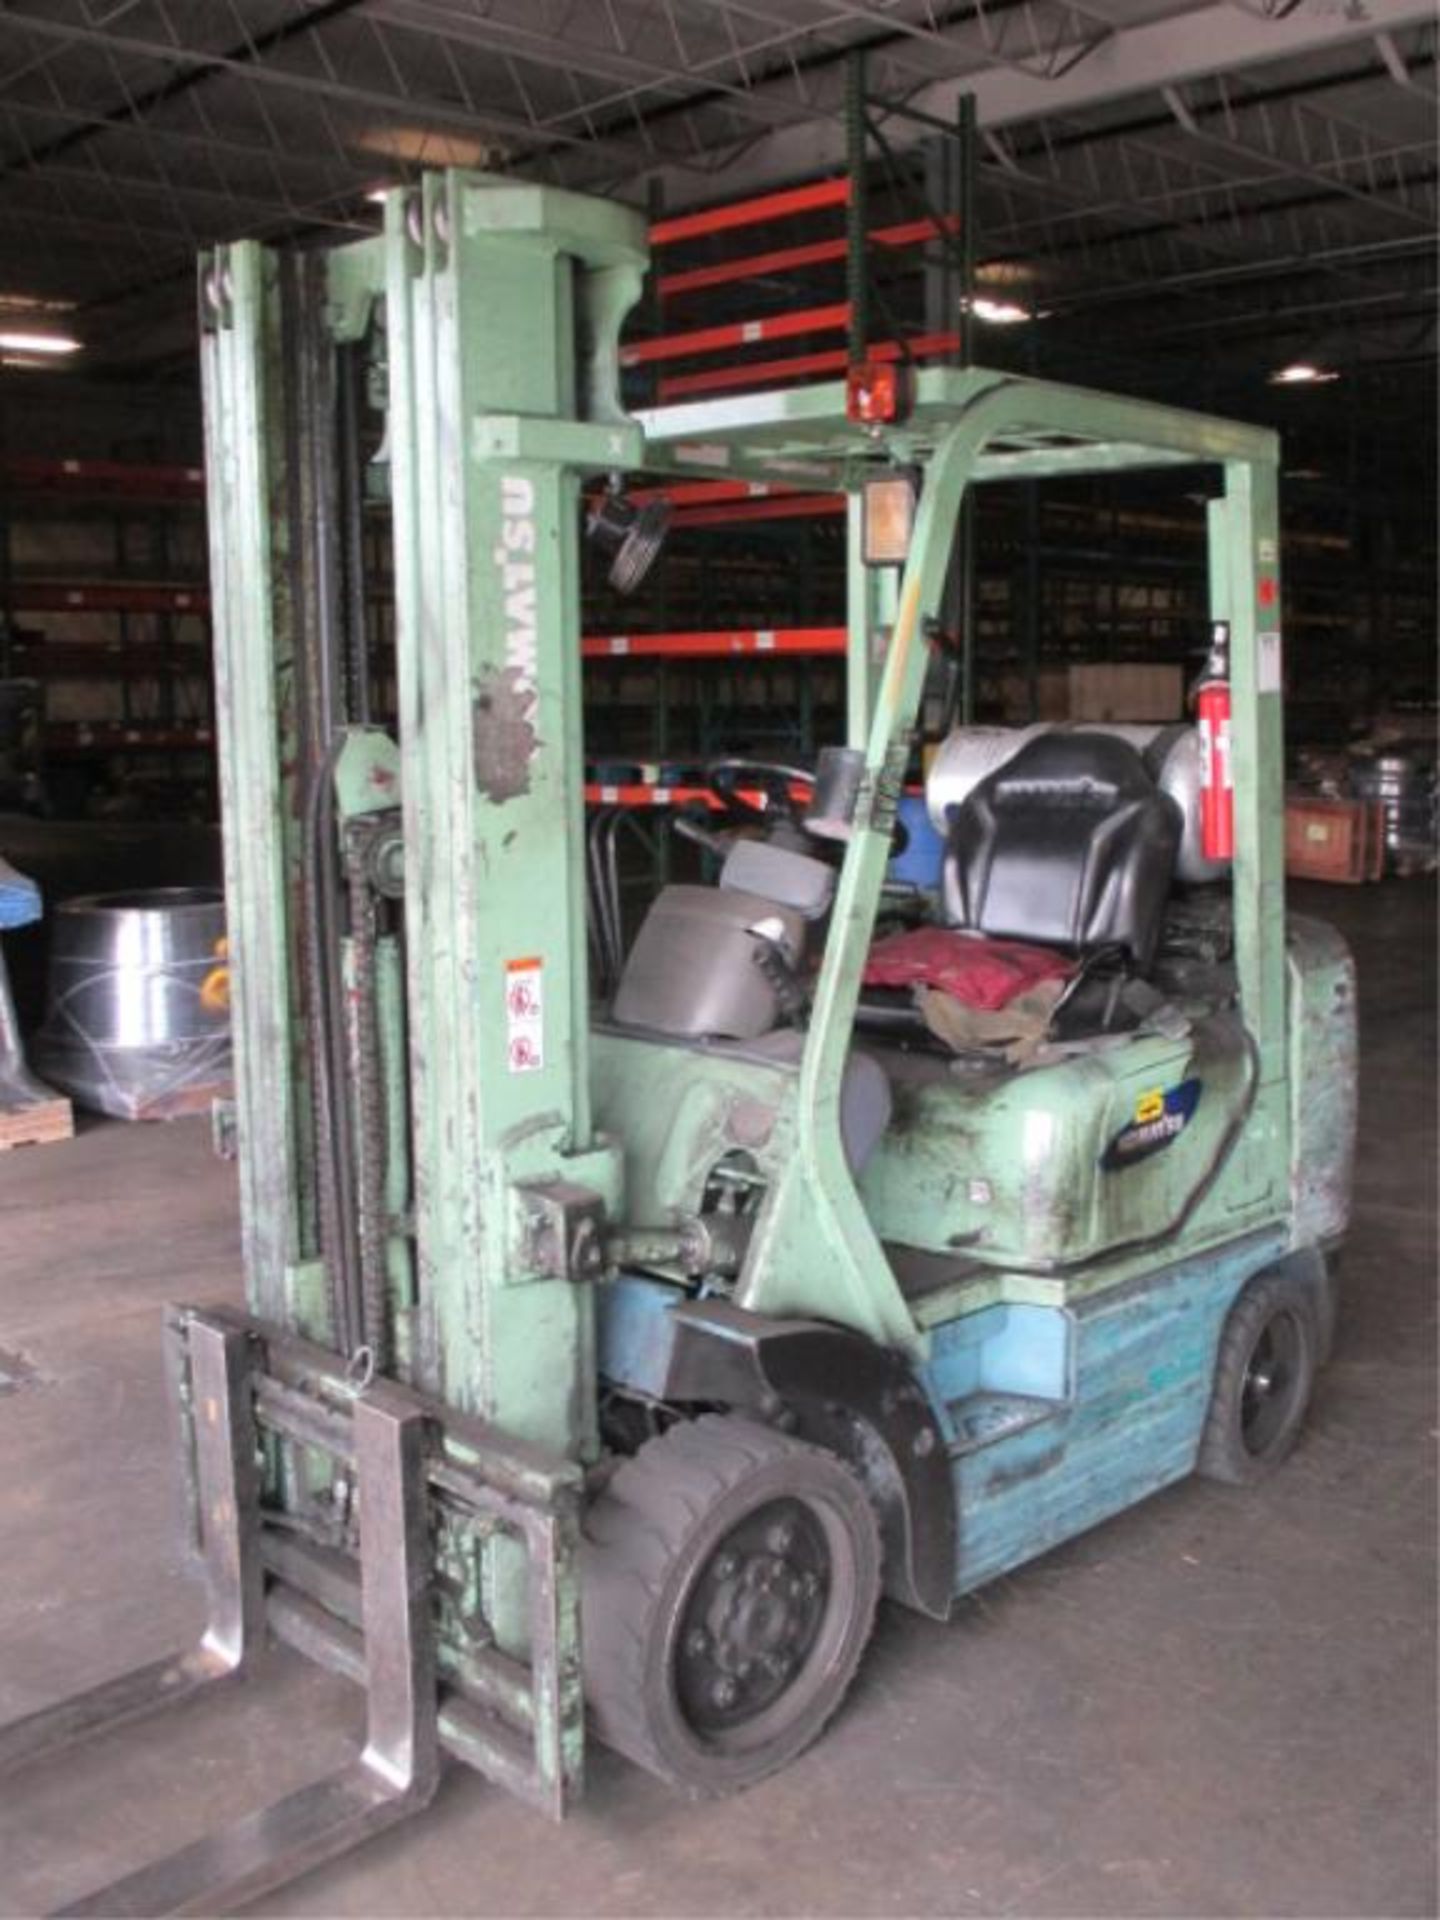 Komatsu FG25ST-12 4-Wheel LP Gas Forklift Truck [propane not included]. Hours: 10897.8; Triple-Stage